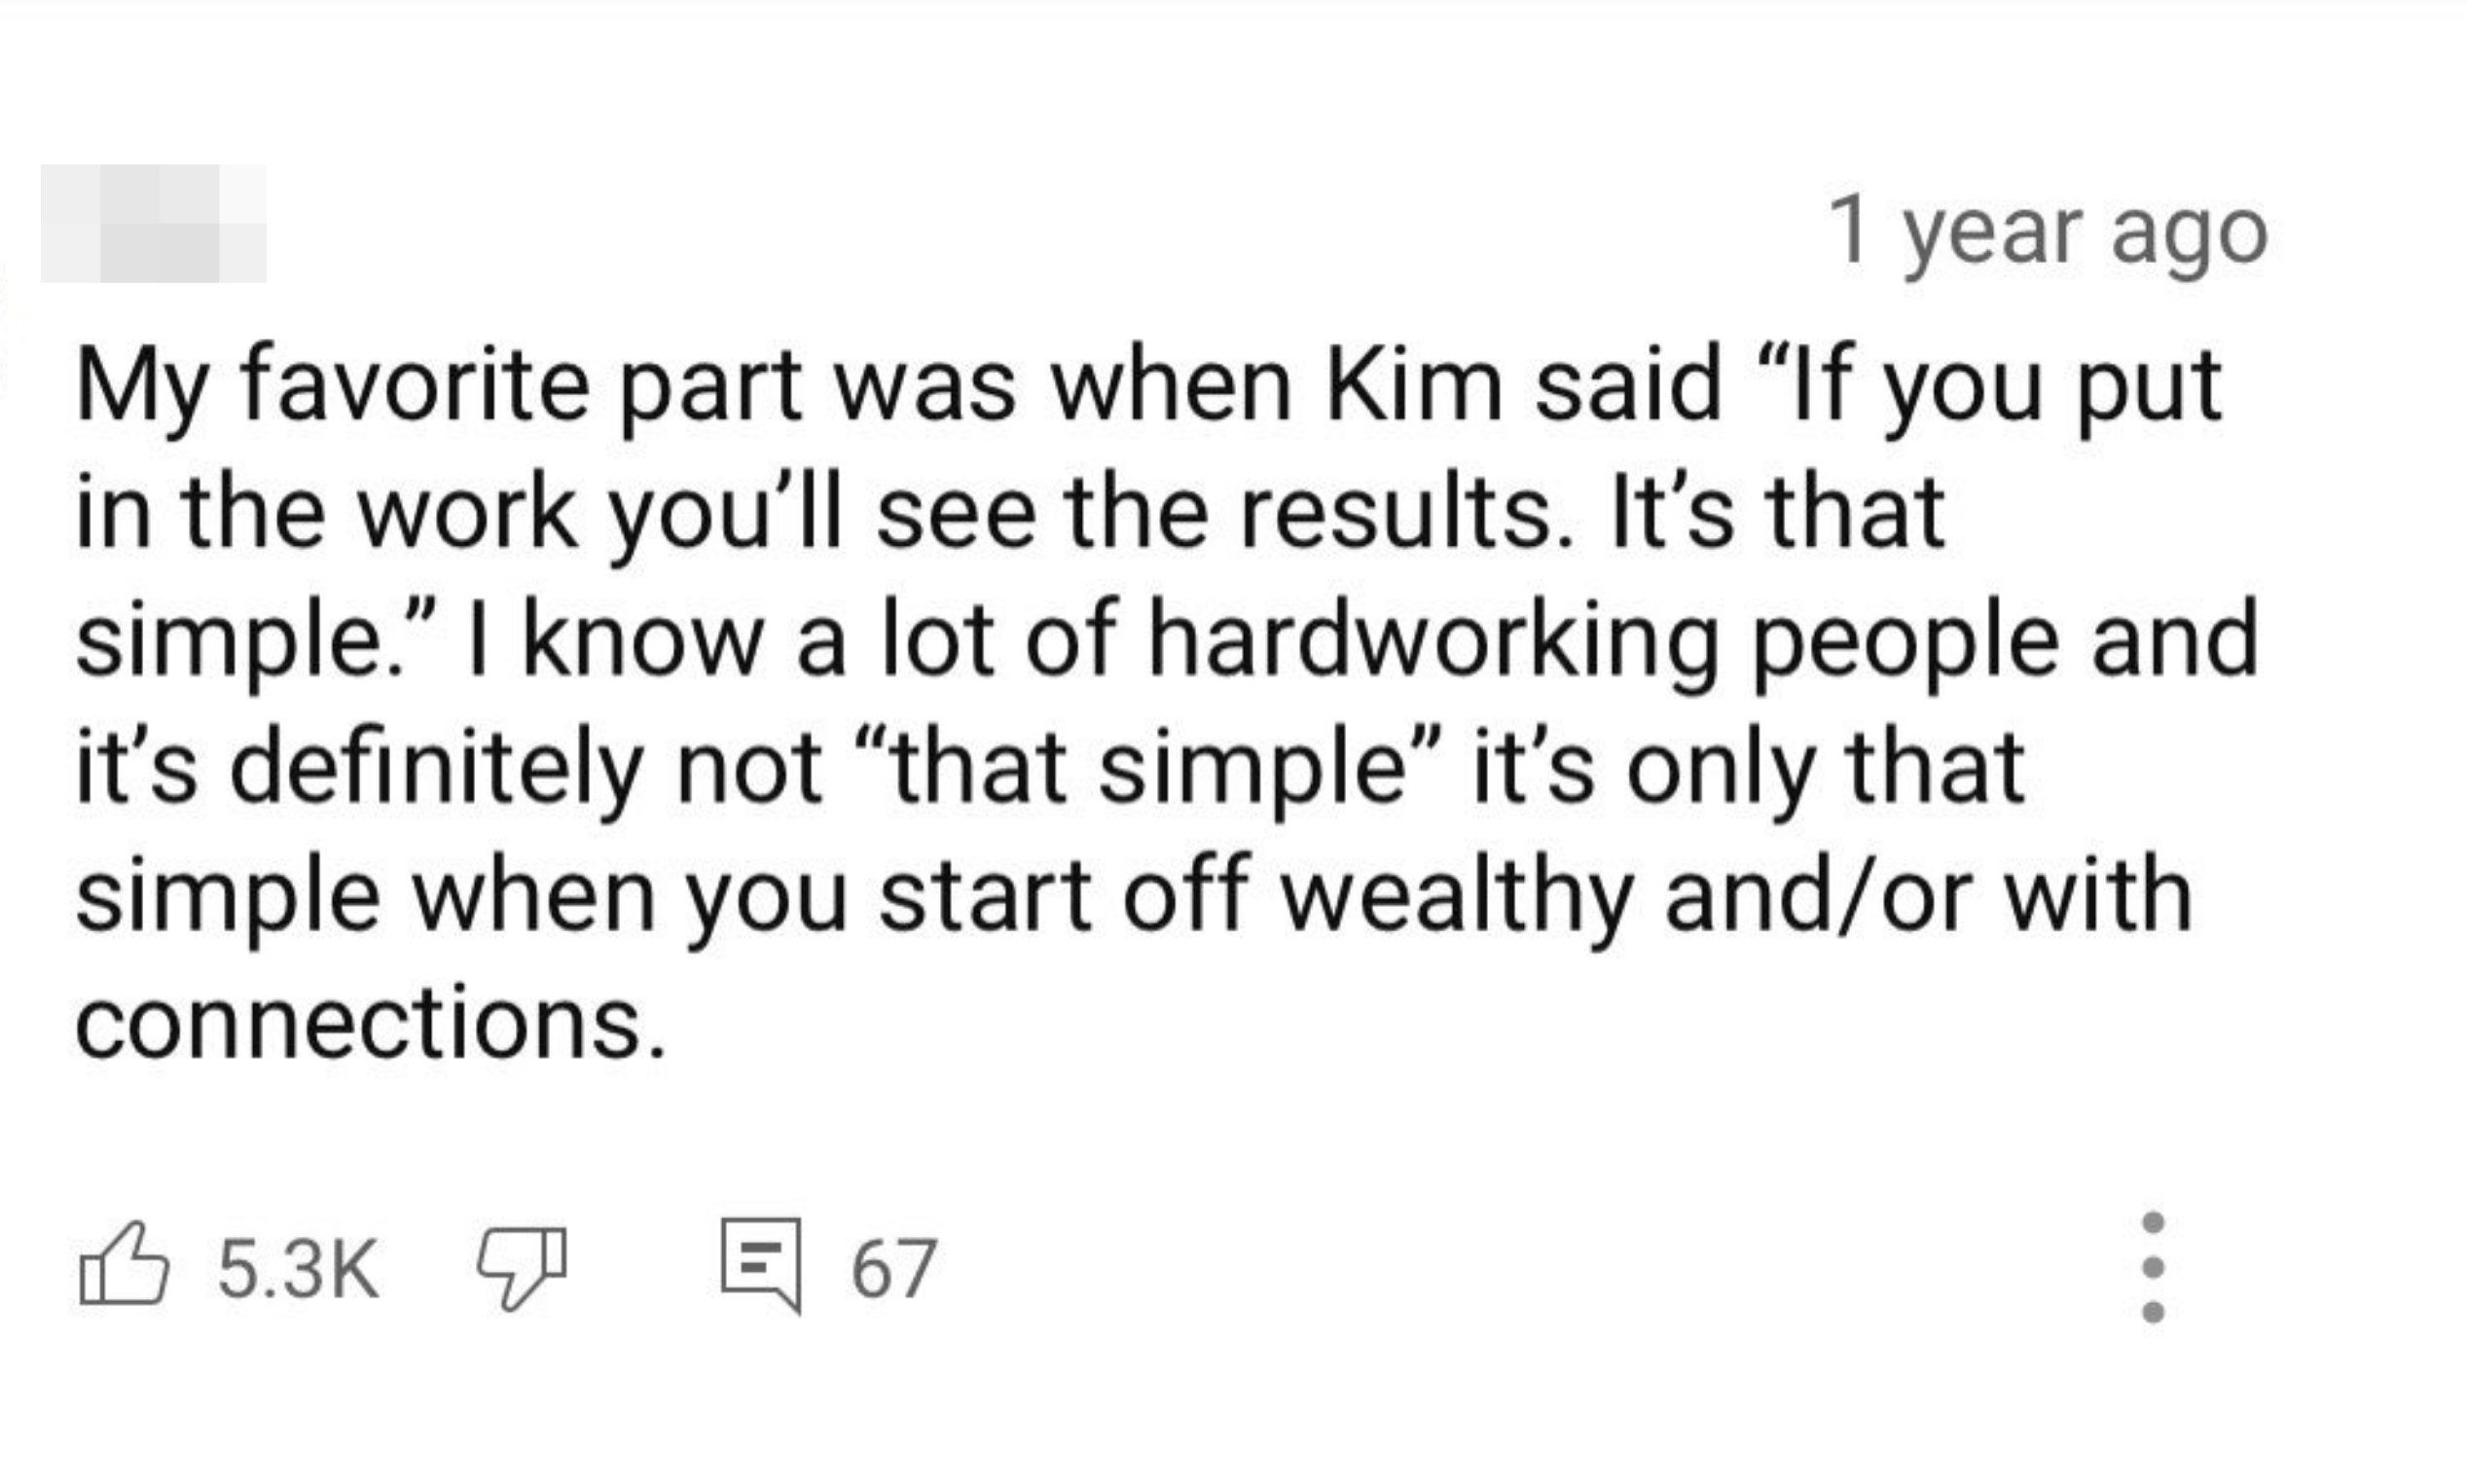 Screenshot of a YouTube comment